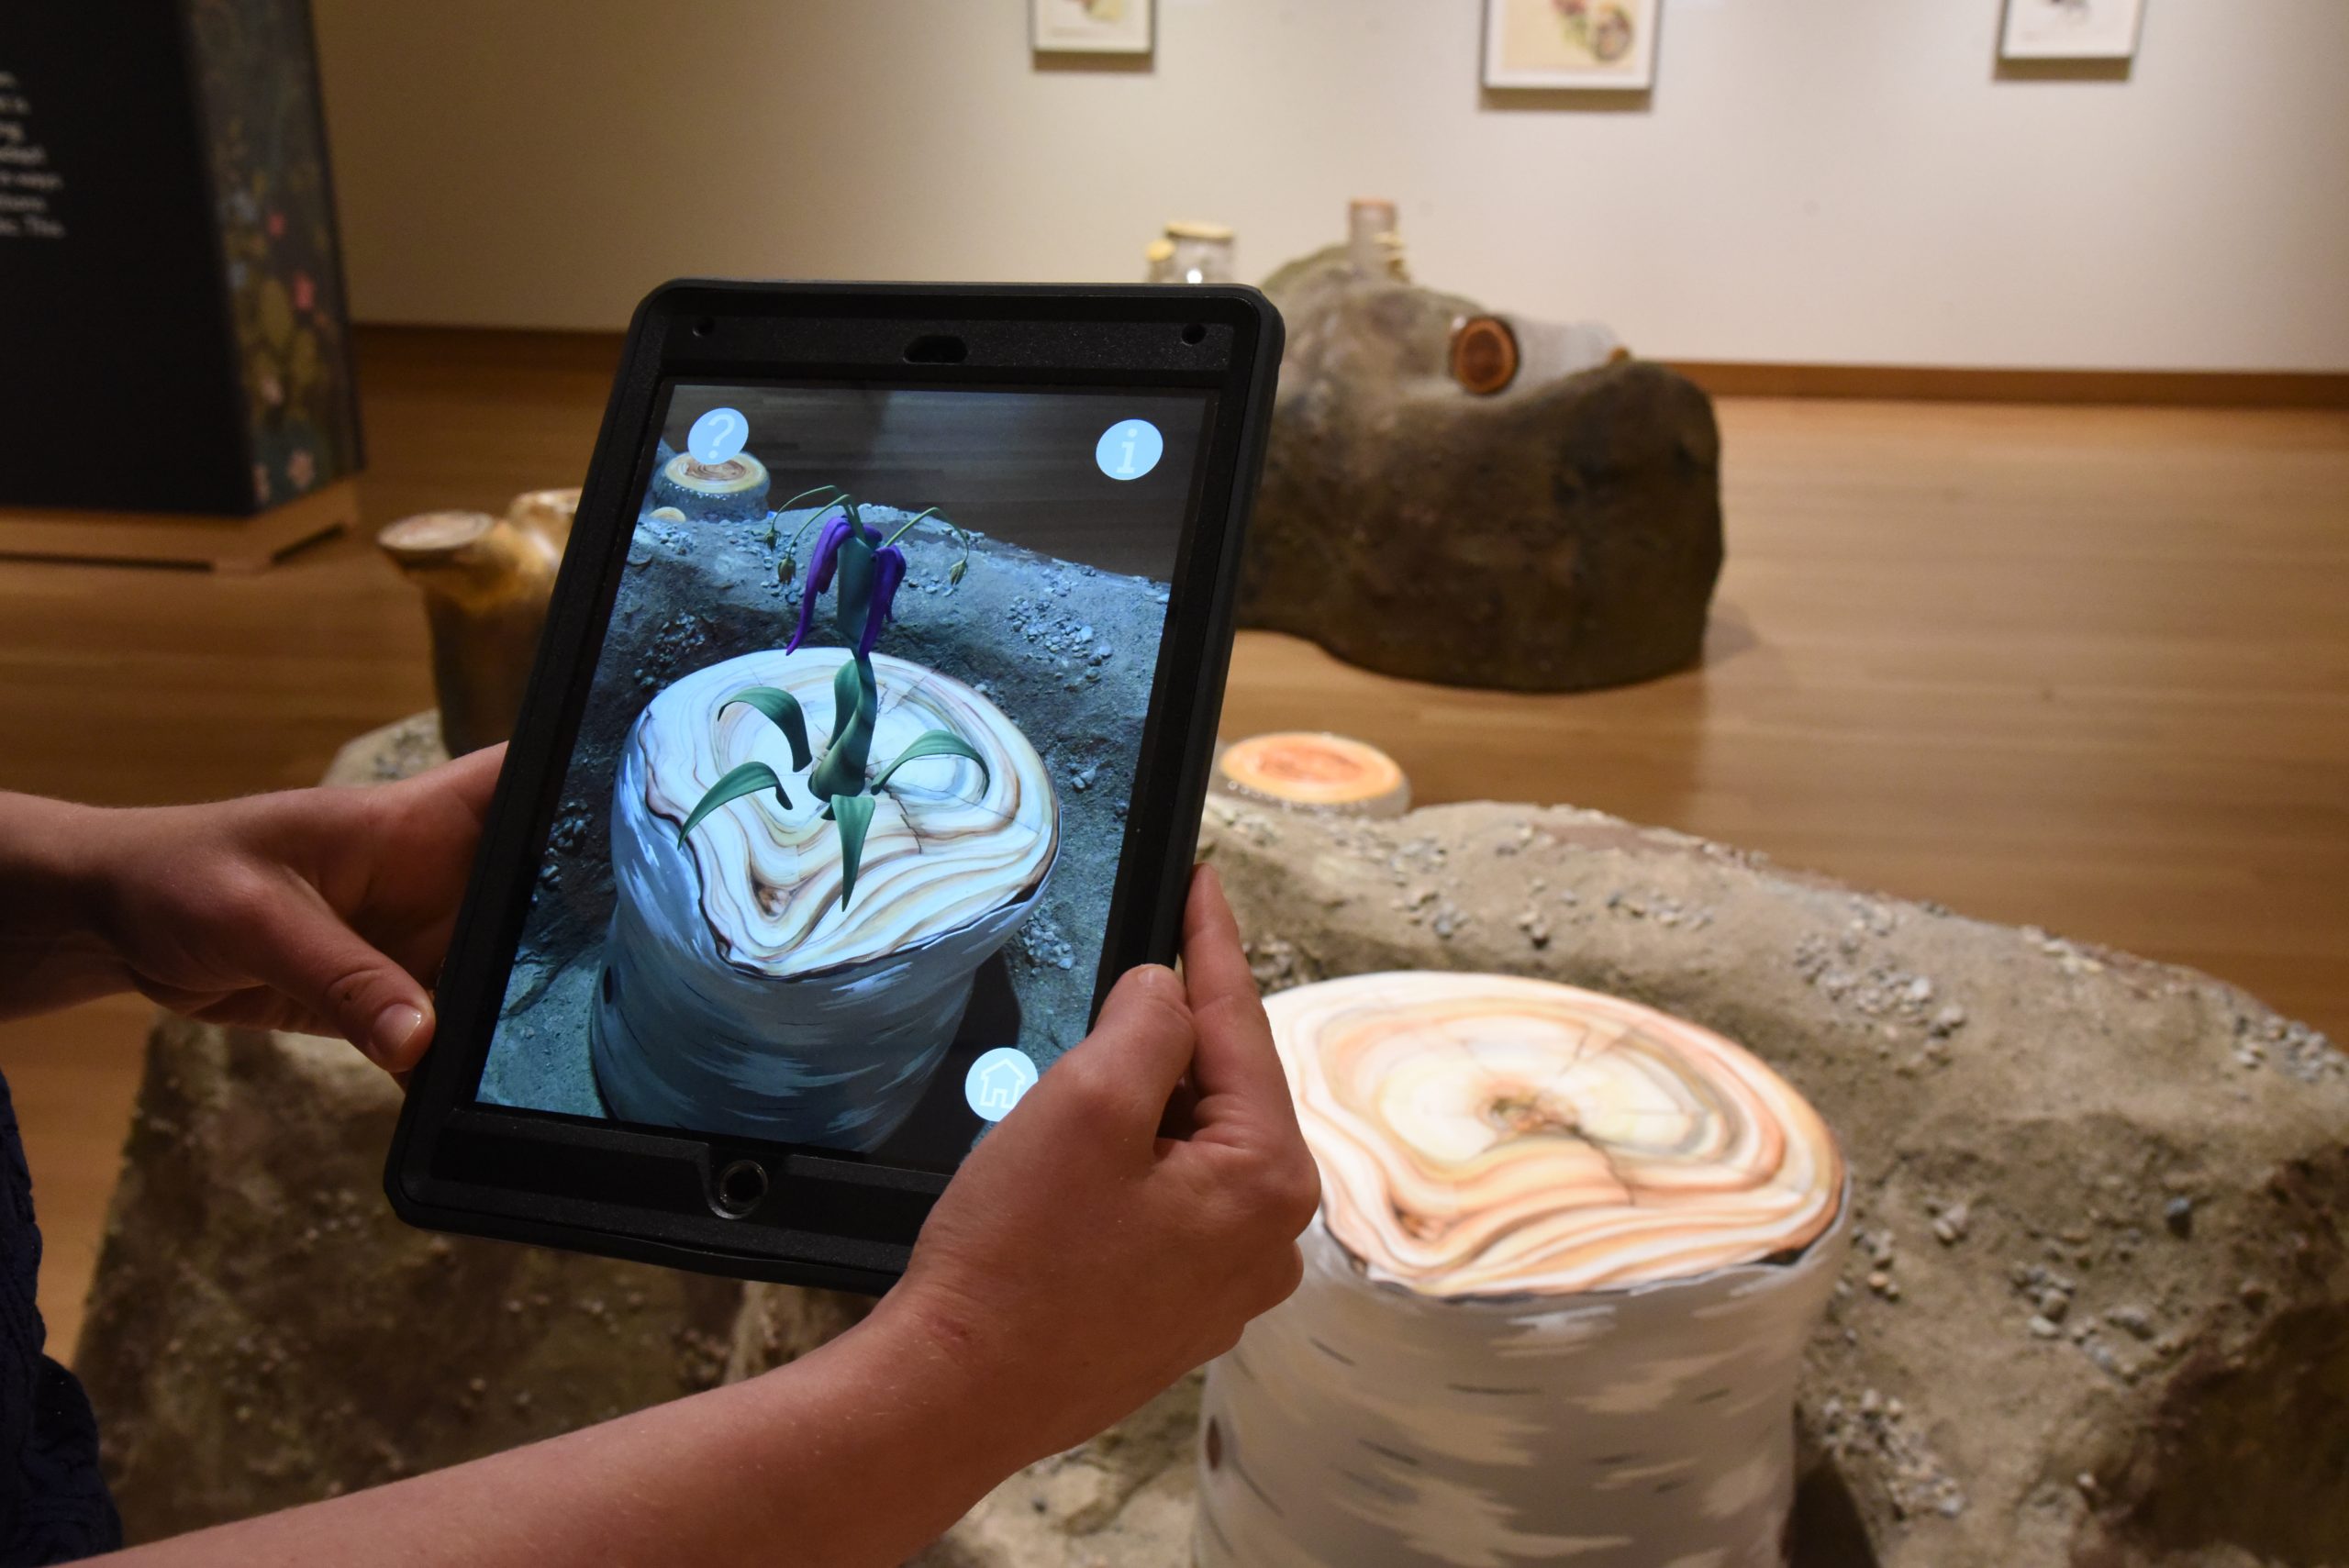 Hands holding an iPad in a gallery space depict the augmented reality feature of the exhibition Reforestation of the Imagination. On screen, the animated flower is sitting in the center of a glass tree stump.